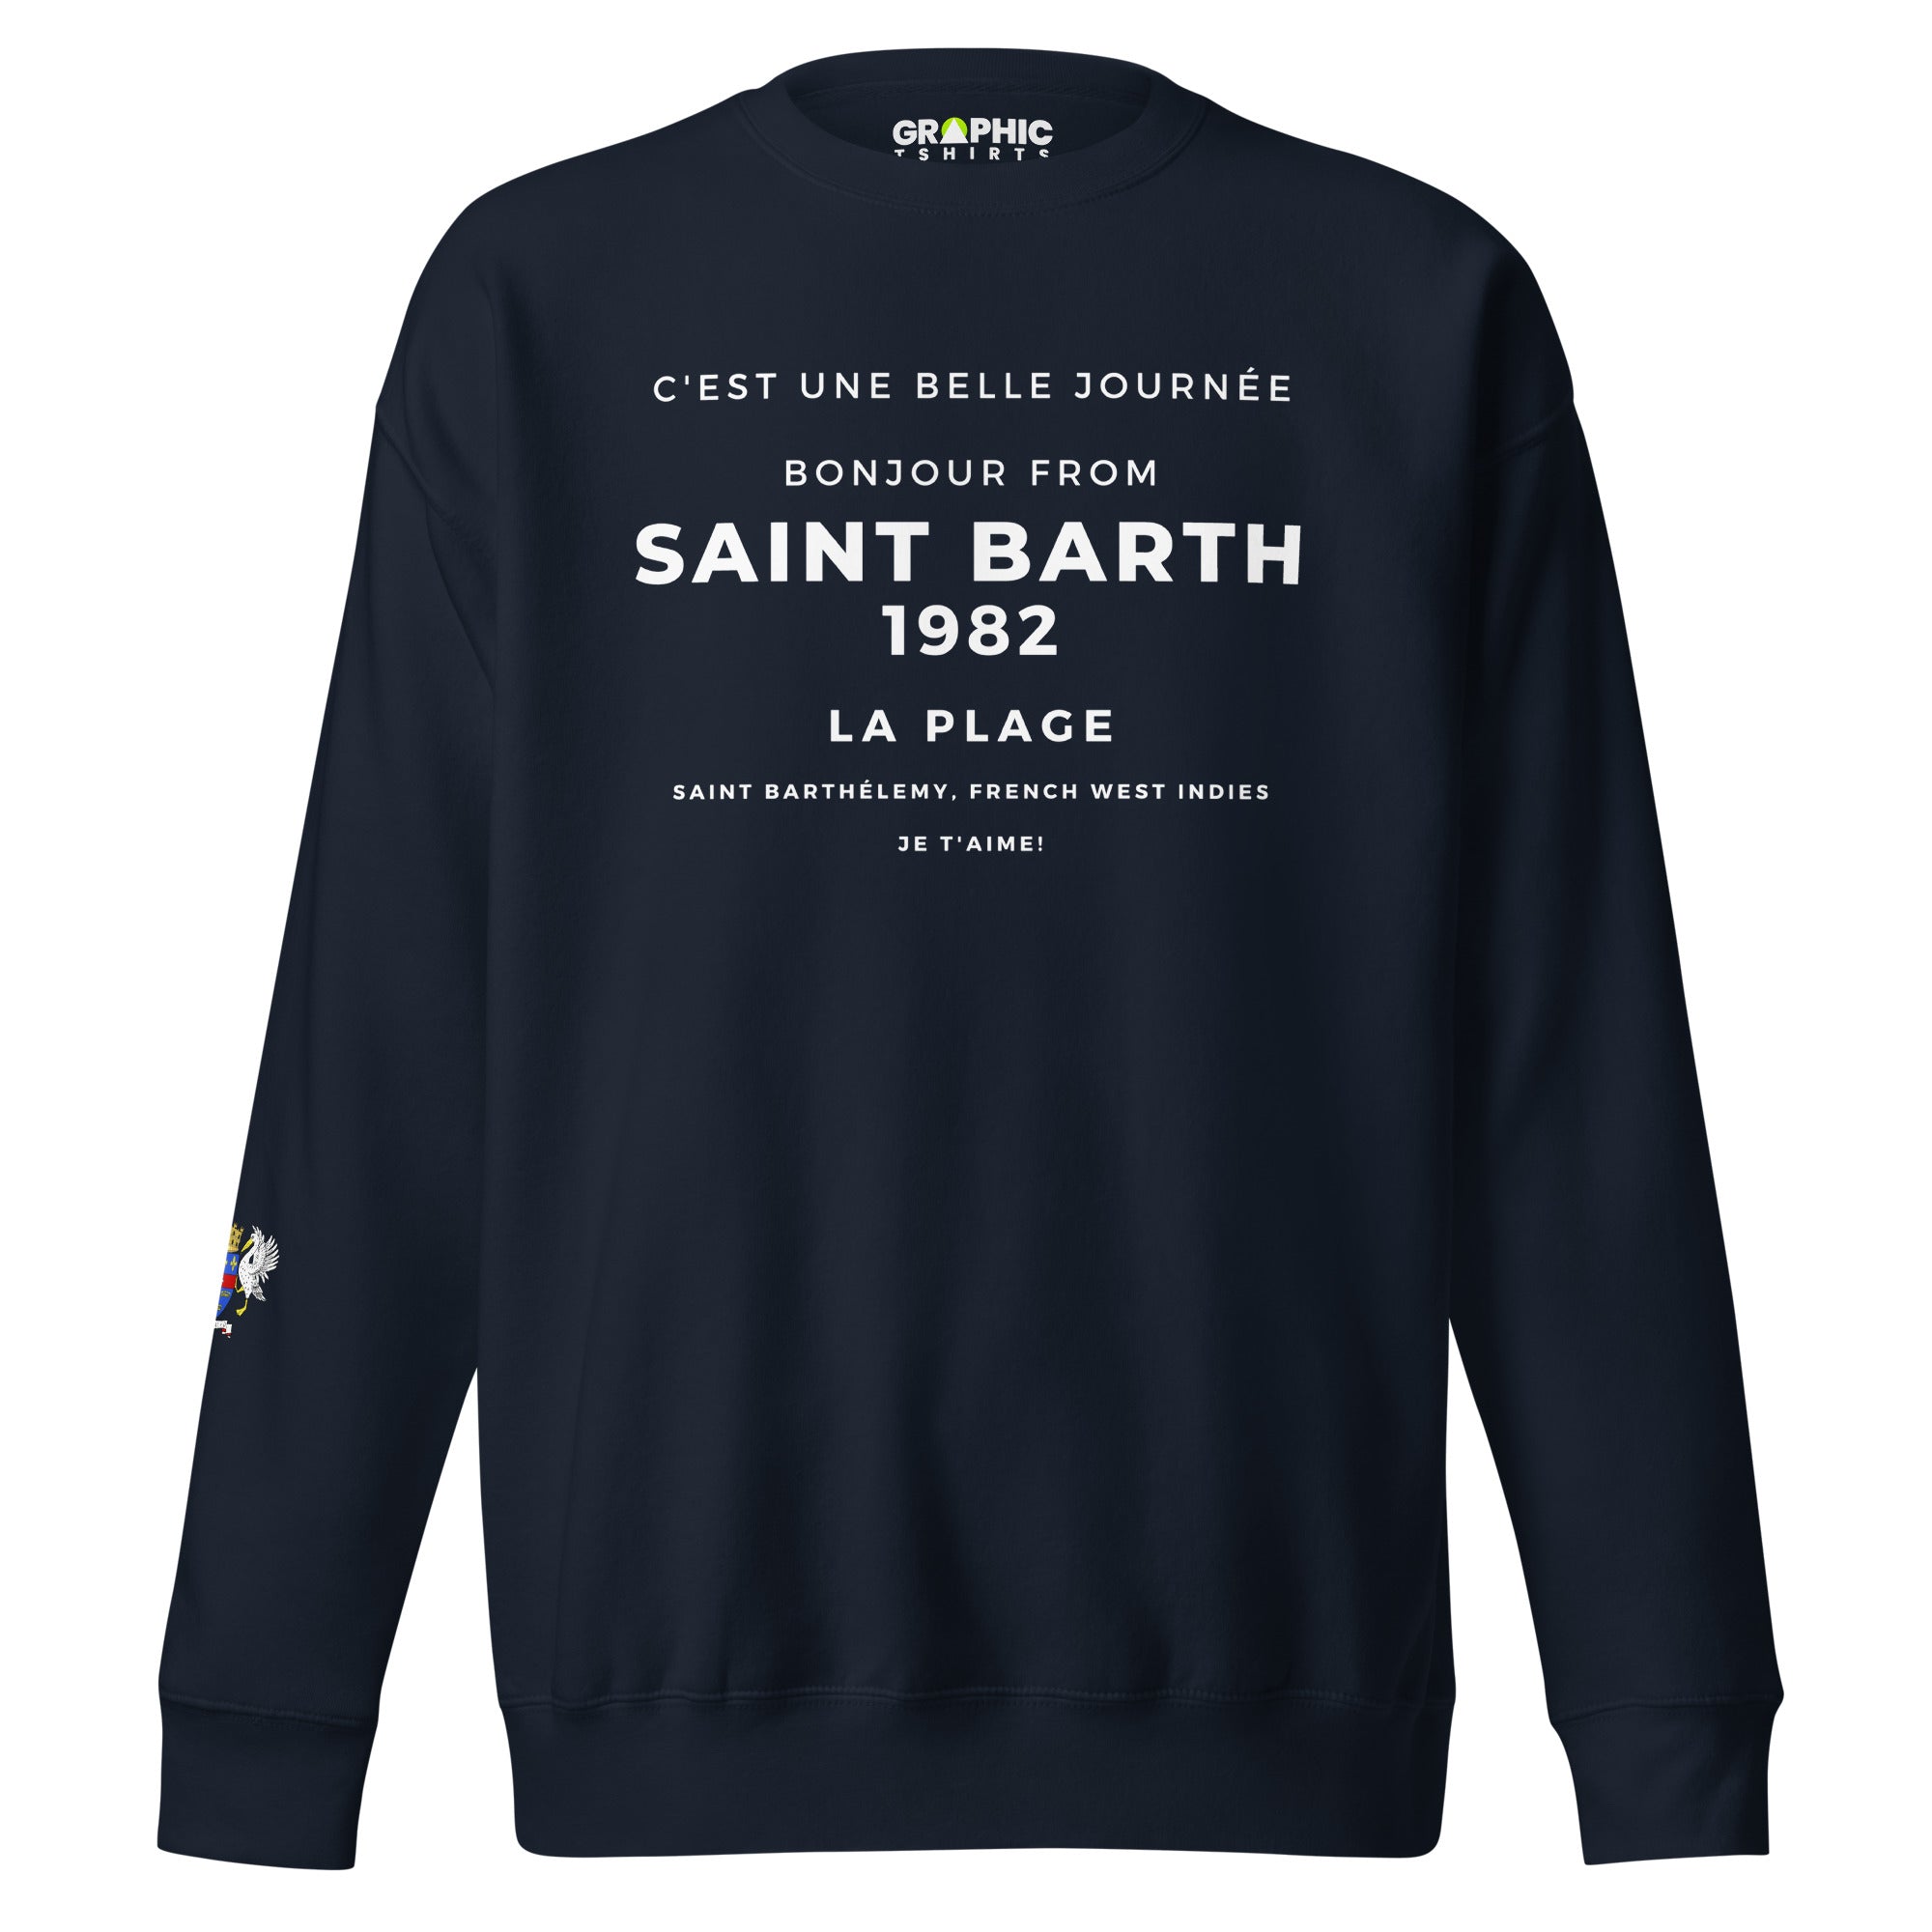 Unisex Premium Sweatshirt - Bonjour From Saint Barthelemy French West Indies 1982 Je T'Aime! - GRAPHIC T-SHIRTS